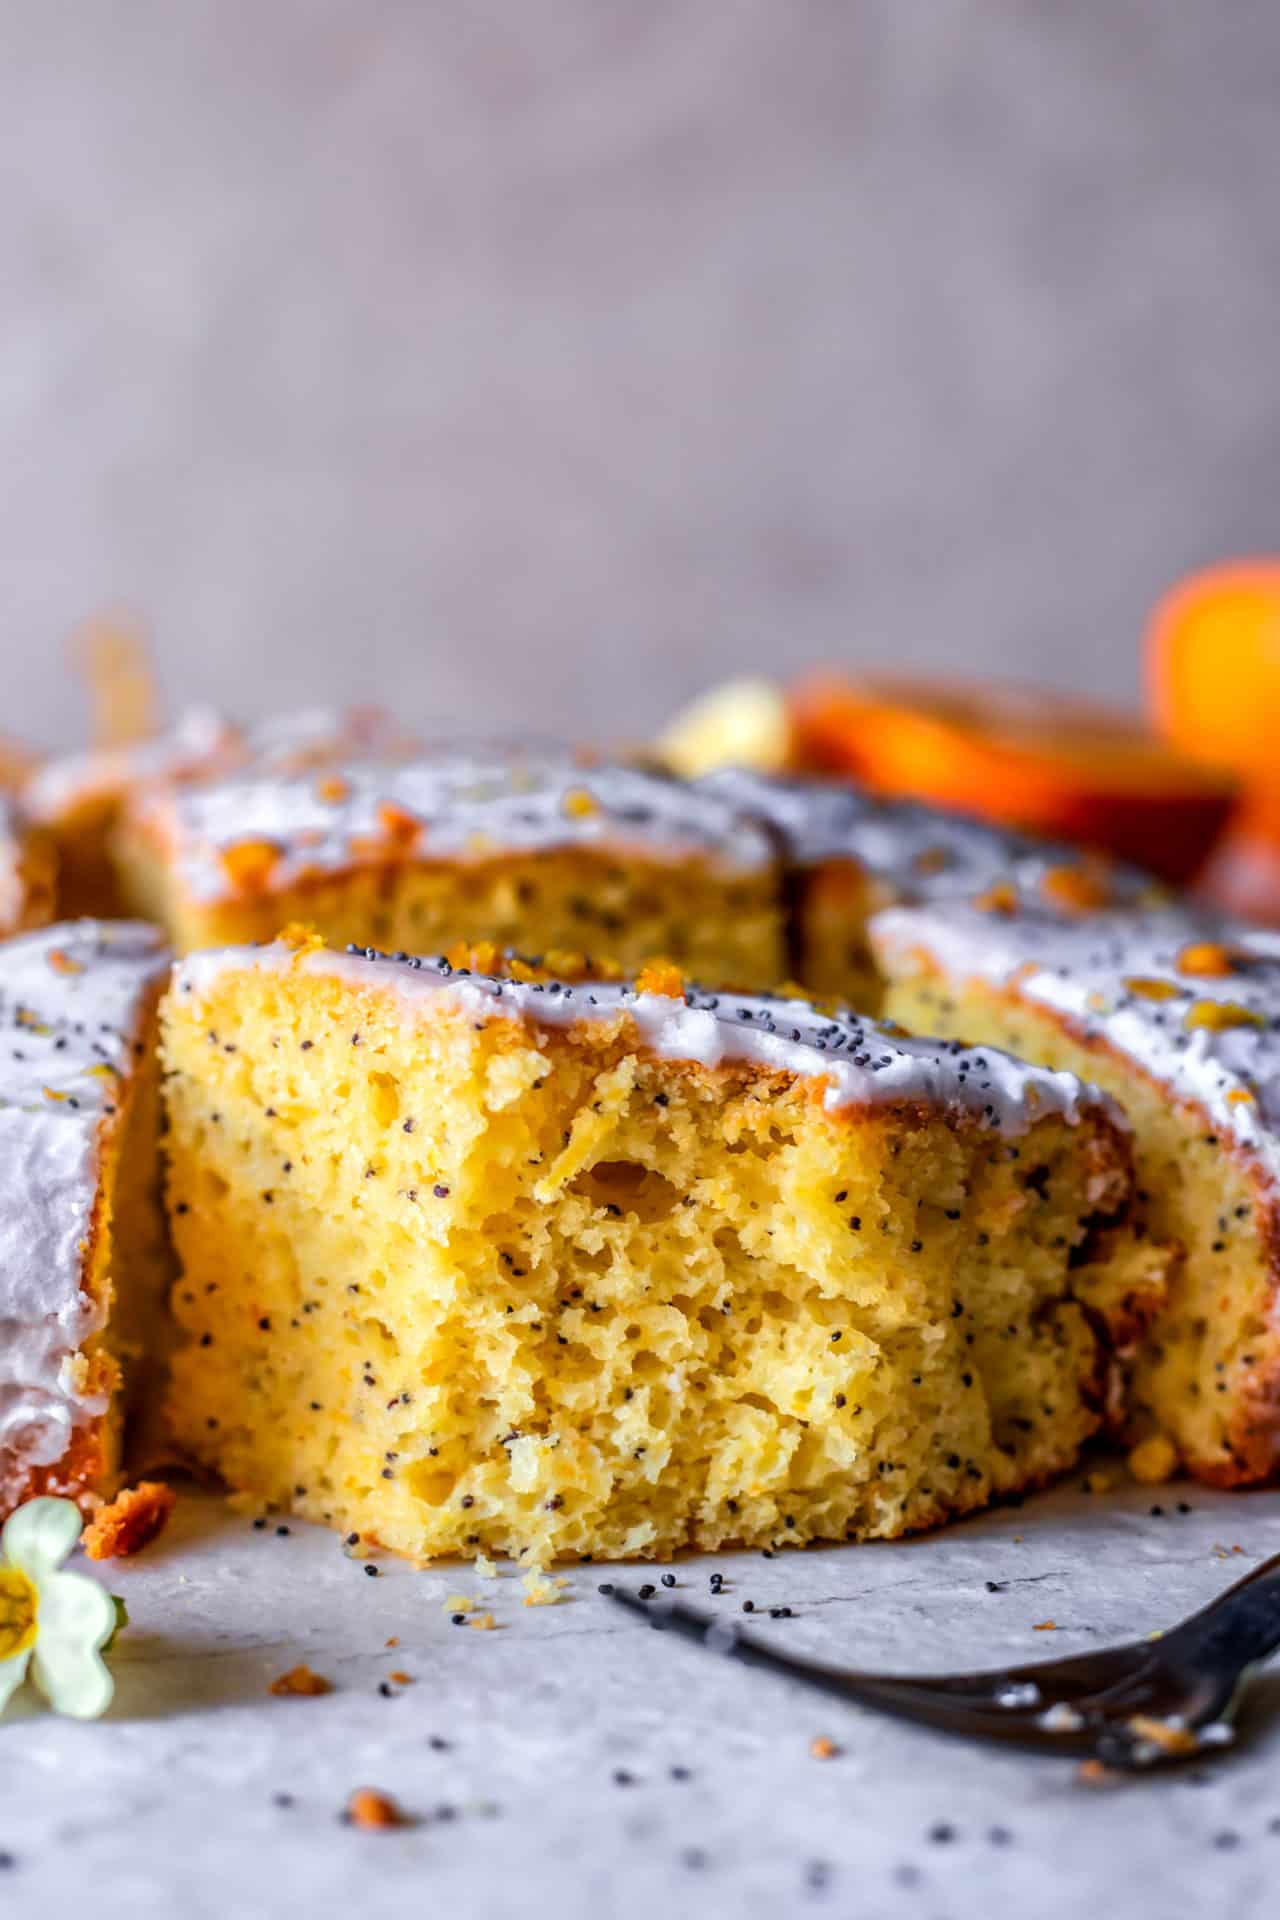 This Gluten-Free Citrus Poppy Seed Cake is light, spongy, flavourful, zesty, perfectly sweetened and just so delicious!
